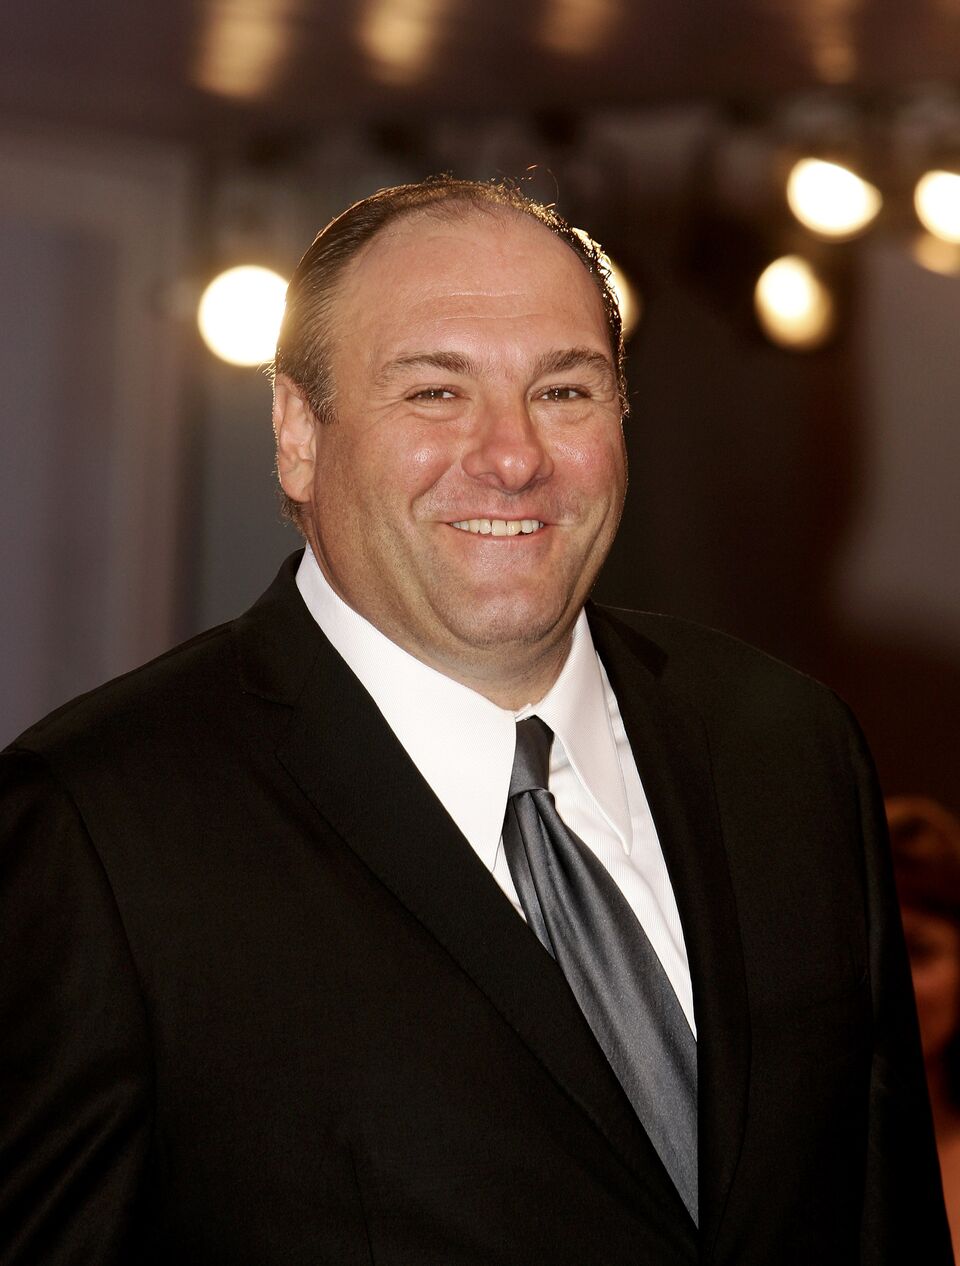 James Gandolfini attends the "Romance and Cigarettes" competition premiere. | Source: Getty Images